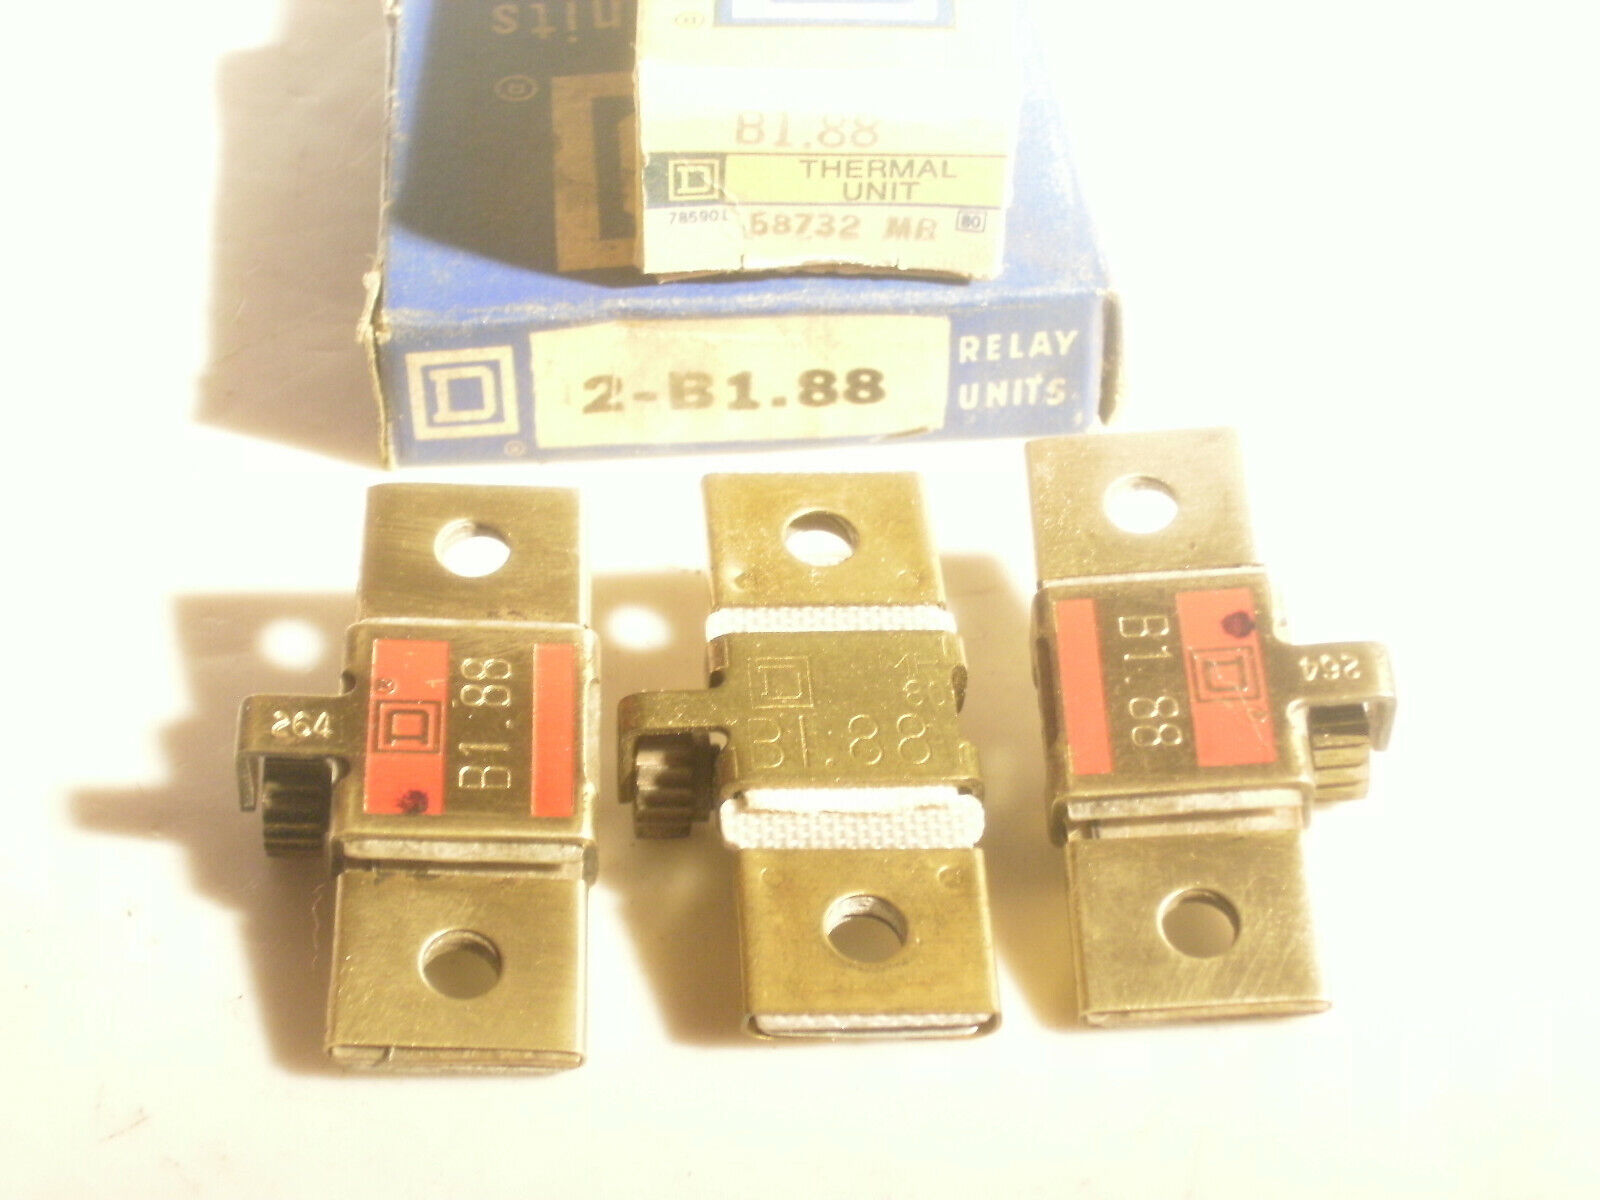 SQUARE D B1.88 HEATER THERMAL OVERLOAD RELAY B188 - LOT OF 3